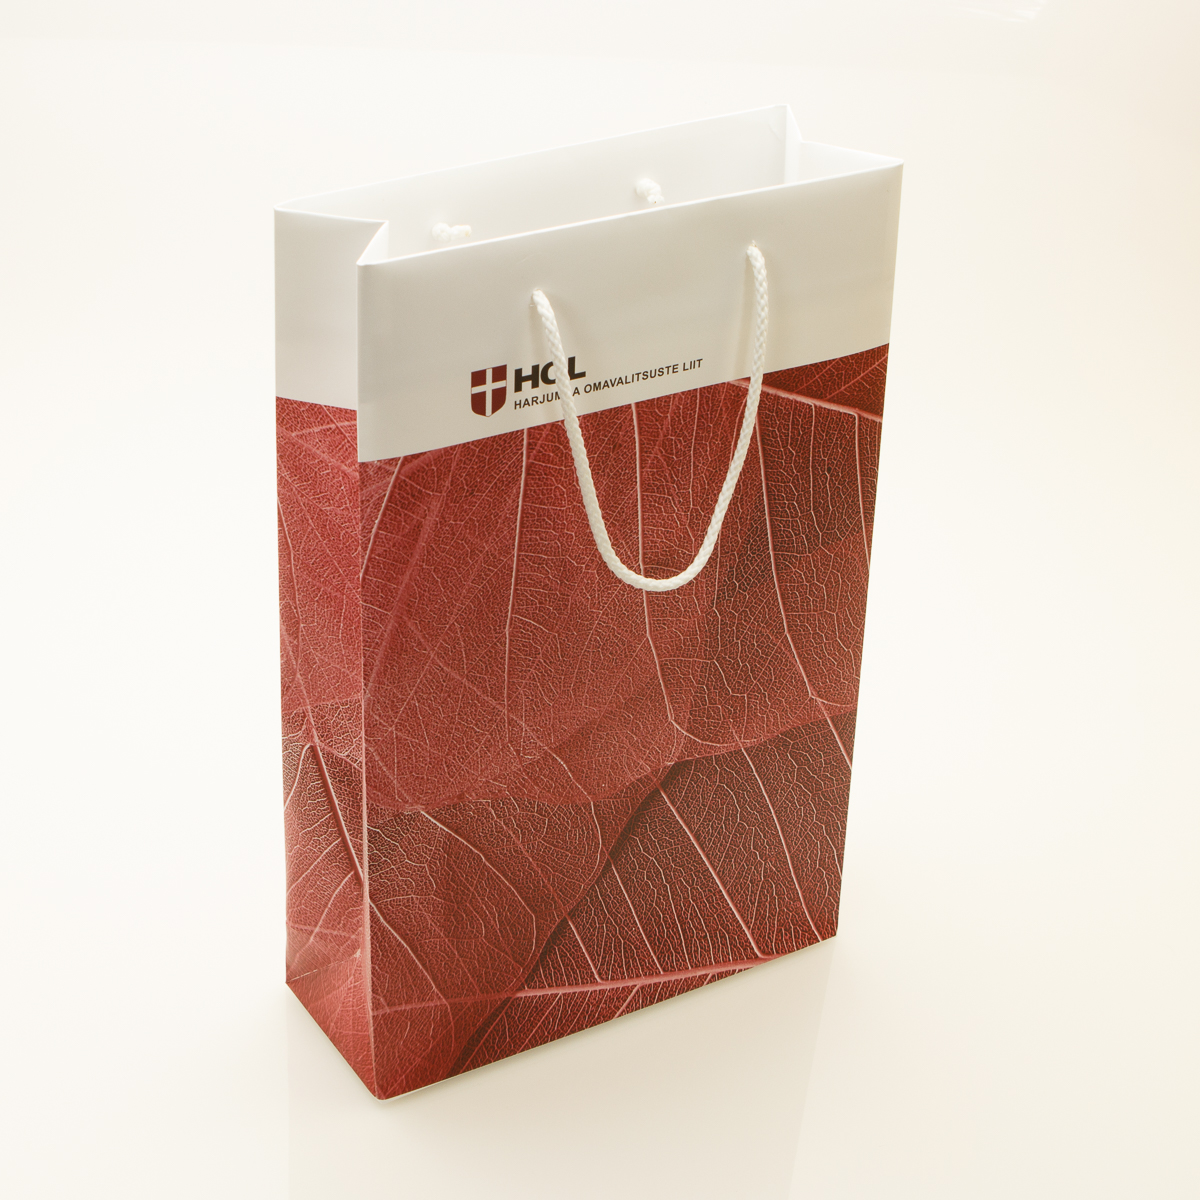 Paper bag for Union of Harju County Municipalities.